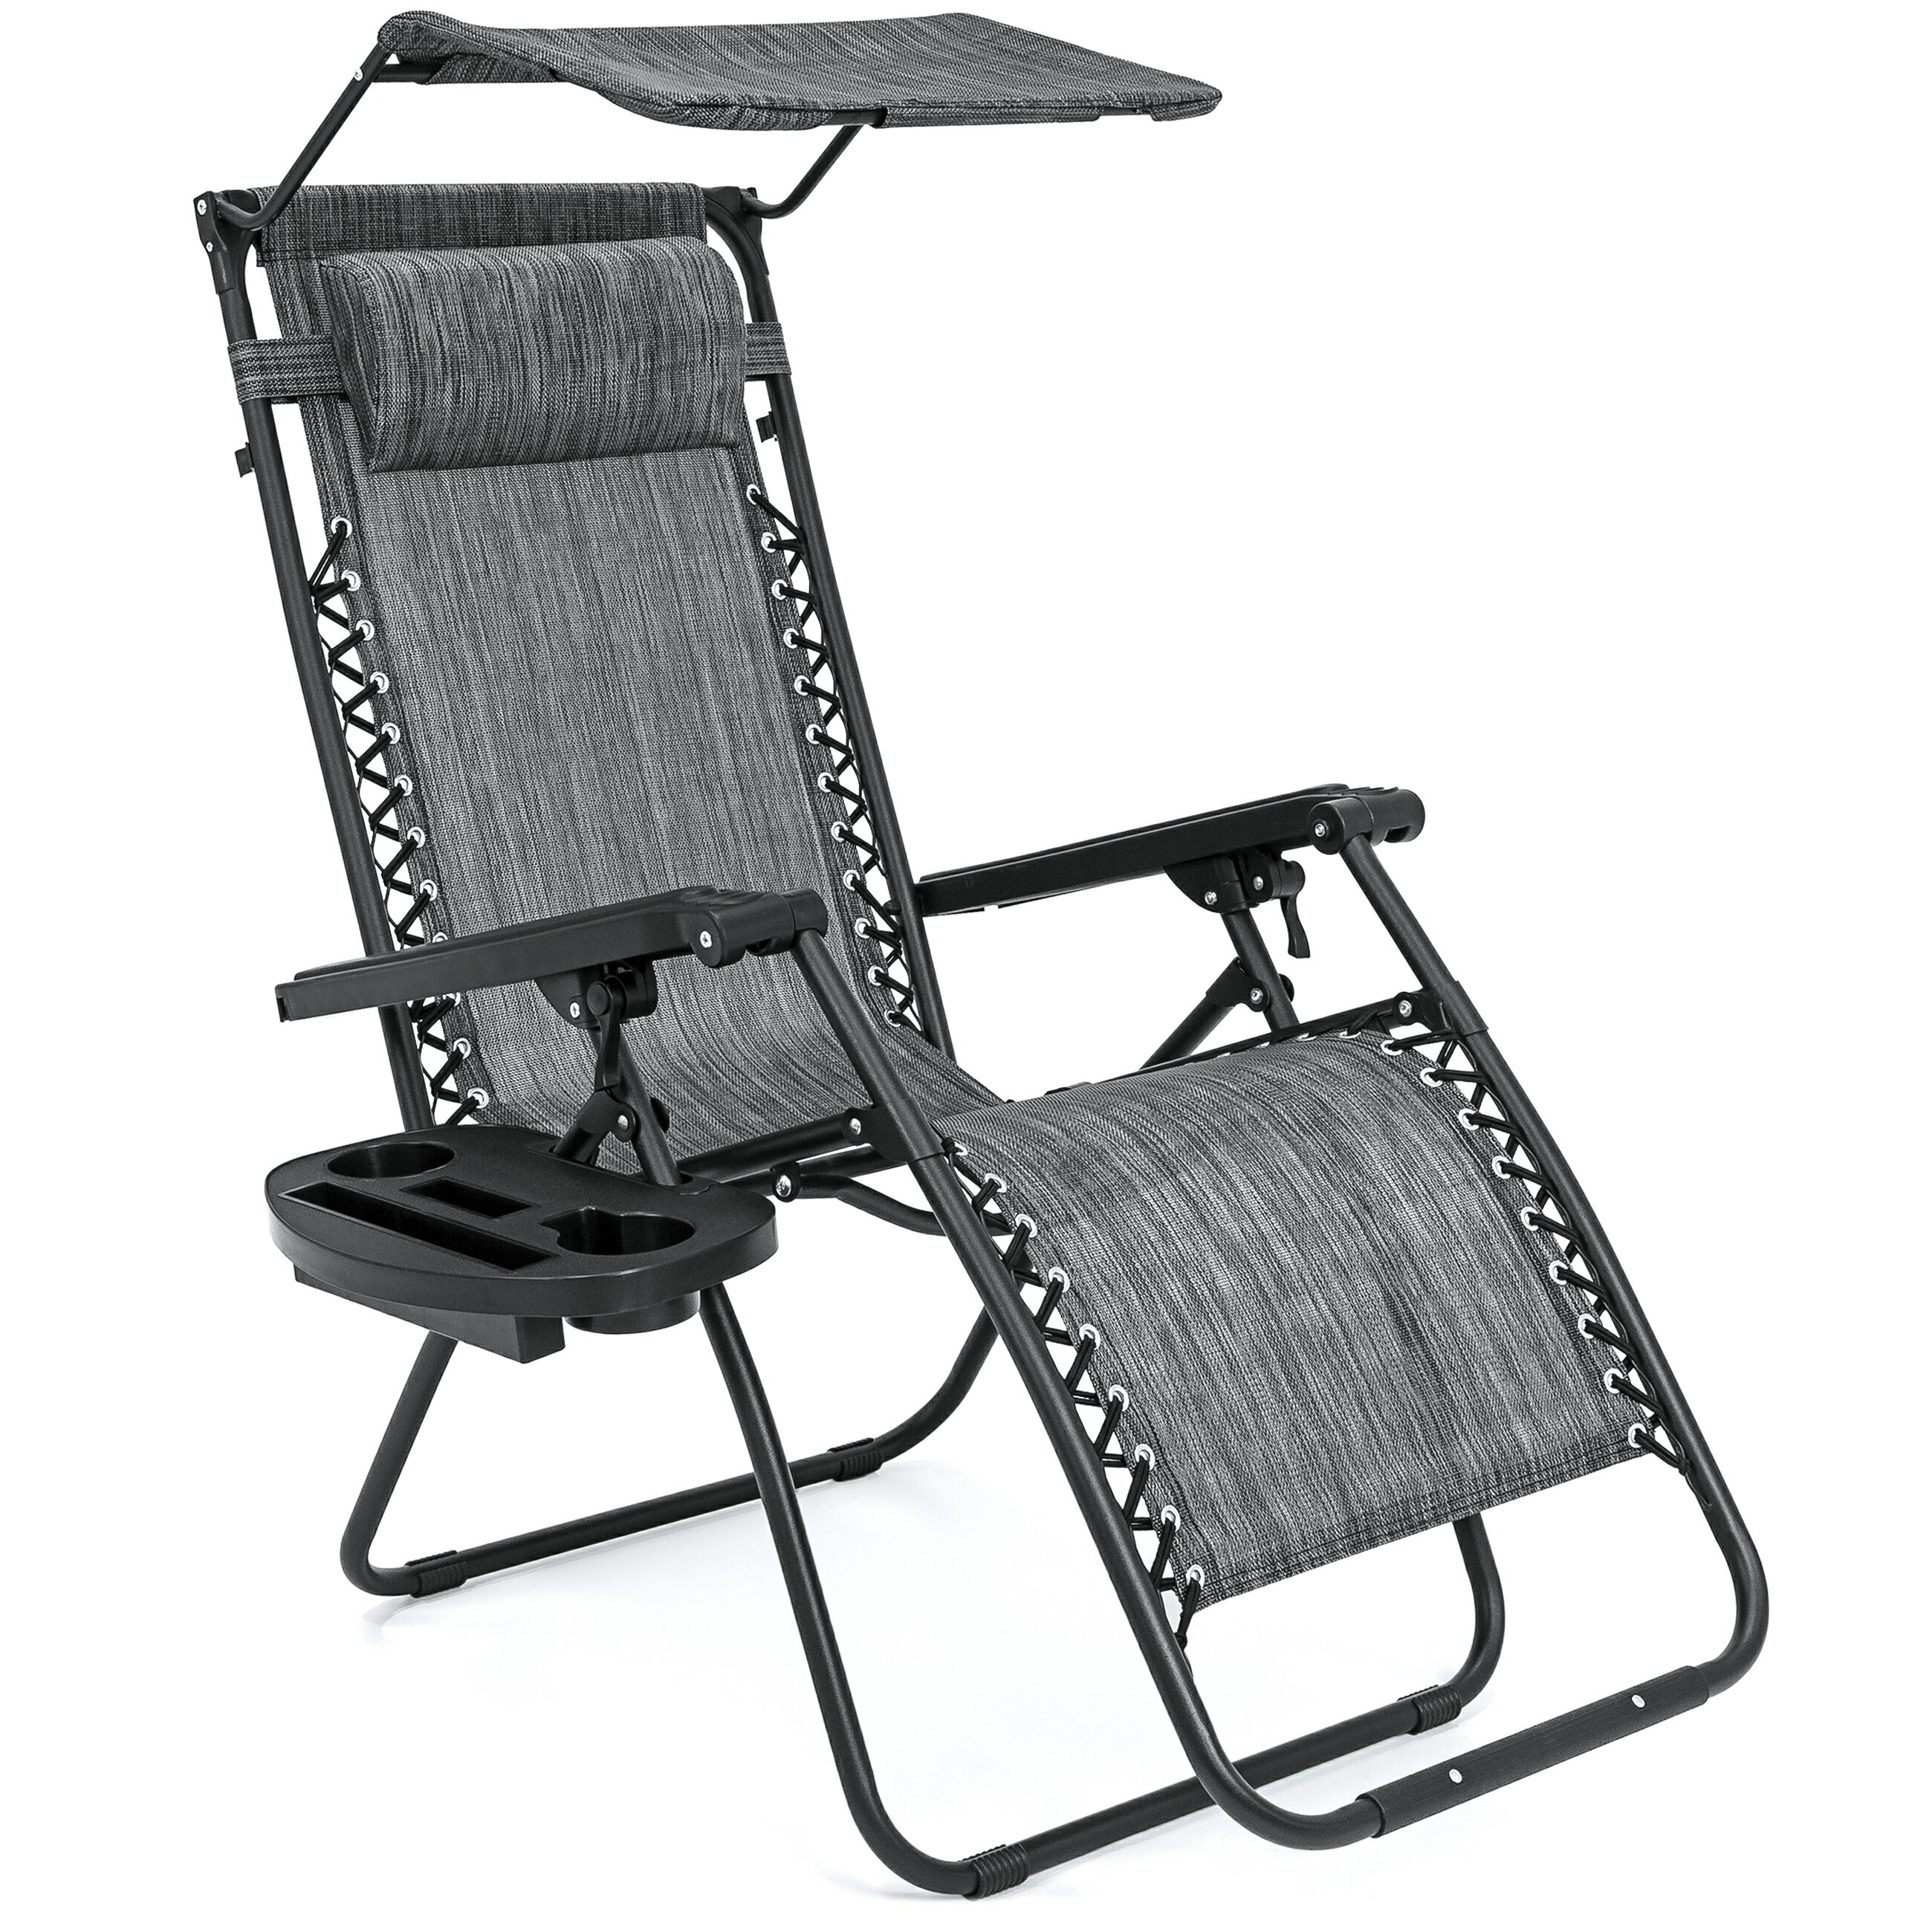 BestChoiceProducts: Best Choice Products Folding Zero Gravity Recliner